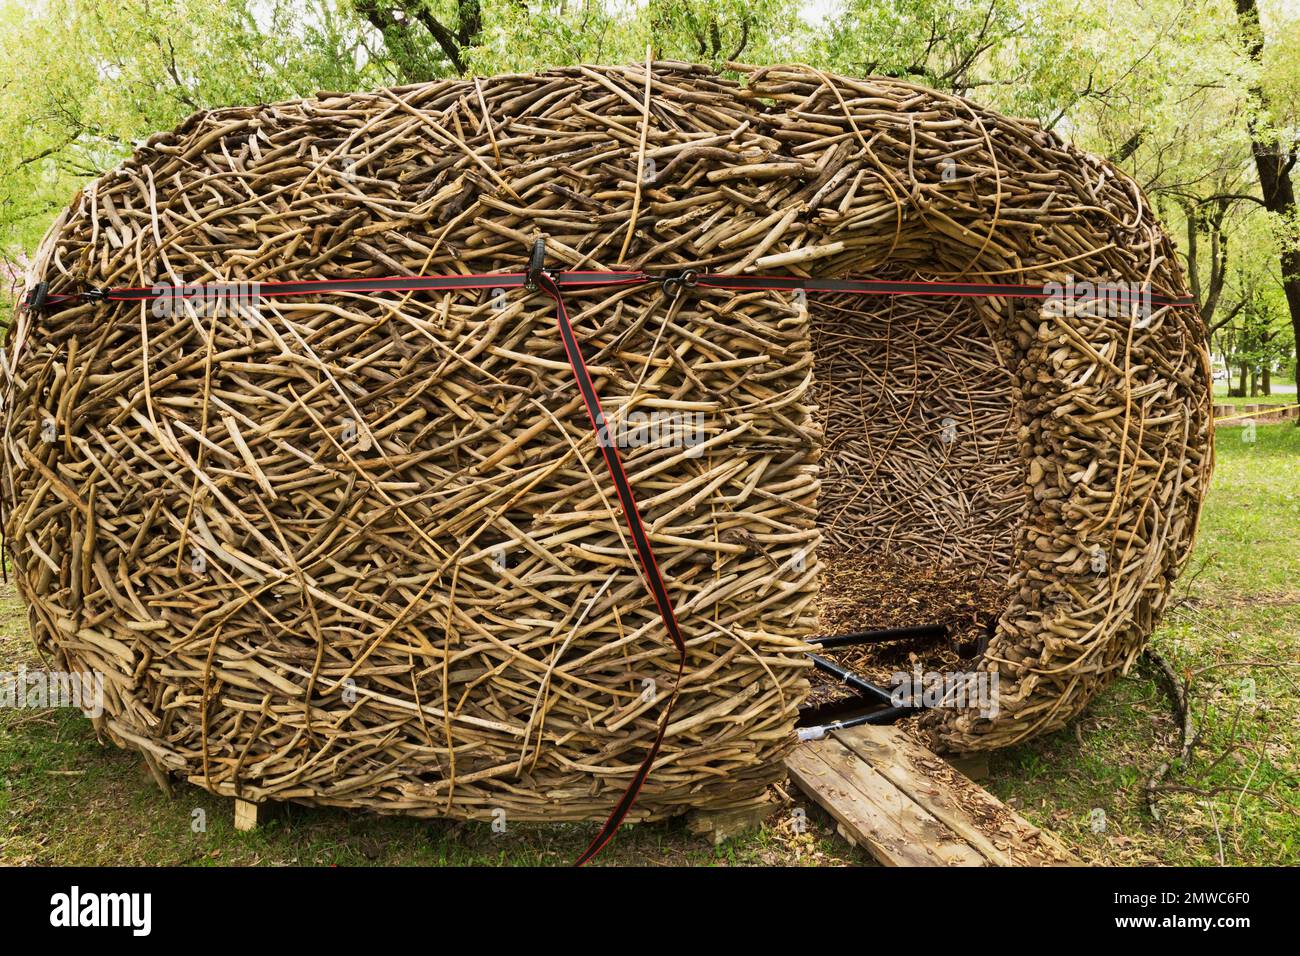 Primitive oval shaped American Indian cut tree trunks, branches hut shelter known as a Wickiup, First Nations Garden, Montreal Botanical Garden, Que. Stock Photo